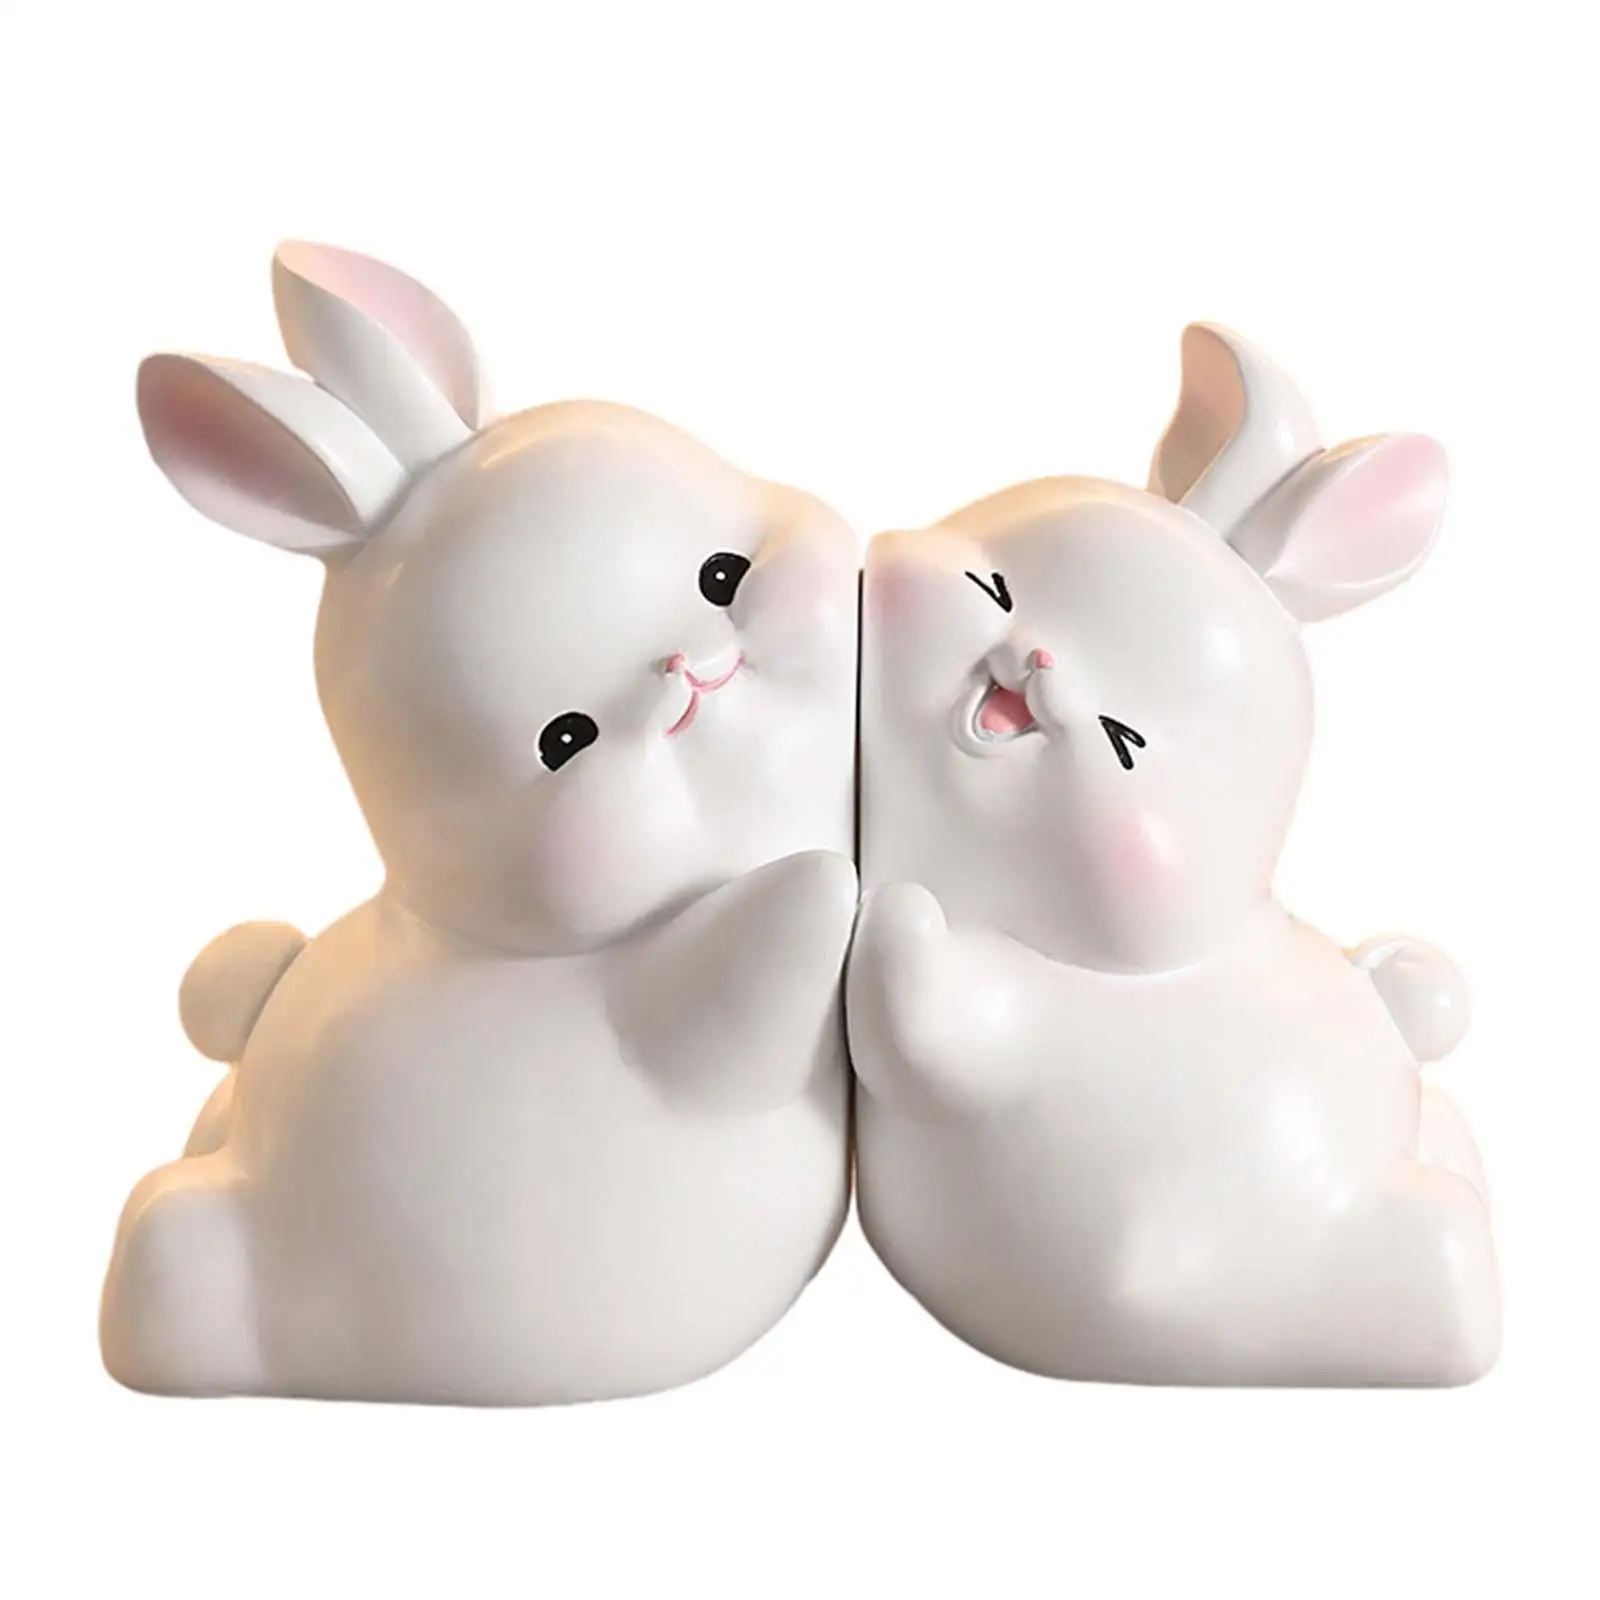 Rabbit Bookends Cute Bunny Book Ends Stopper Resin Animal Figurines Book Ends to Hold Books for Shelves Office Cabinet Desk Home